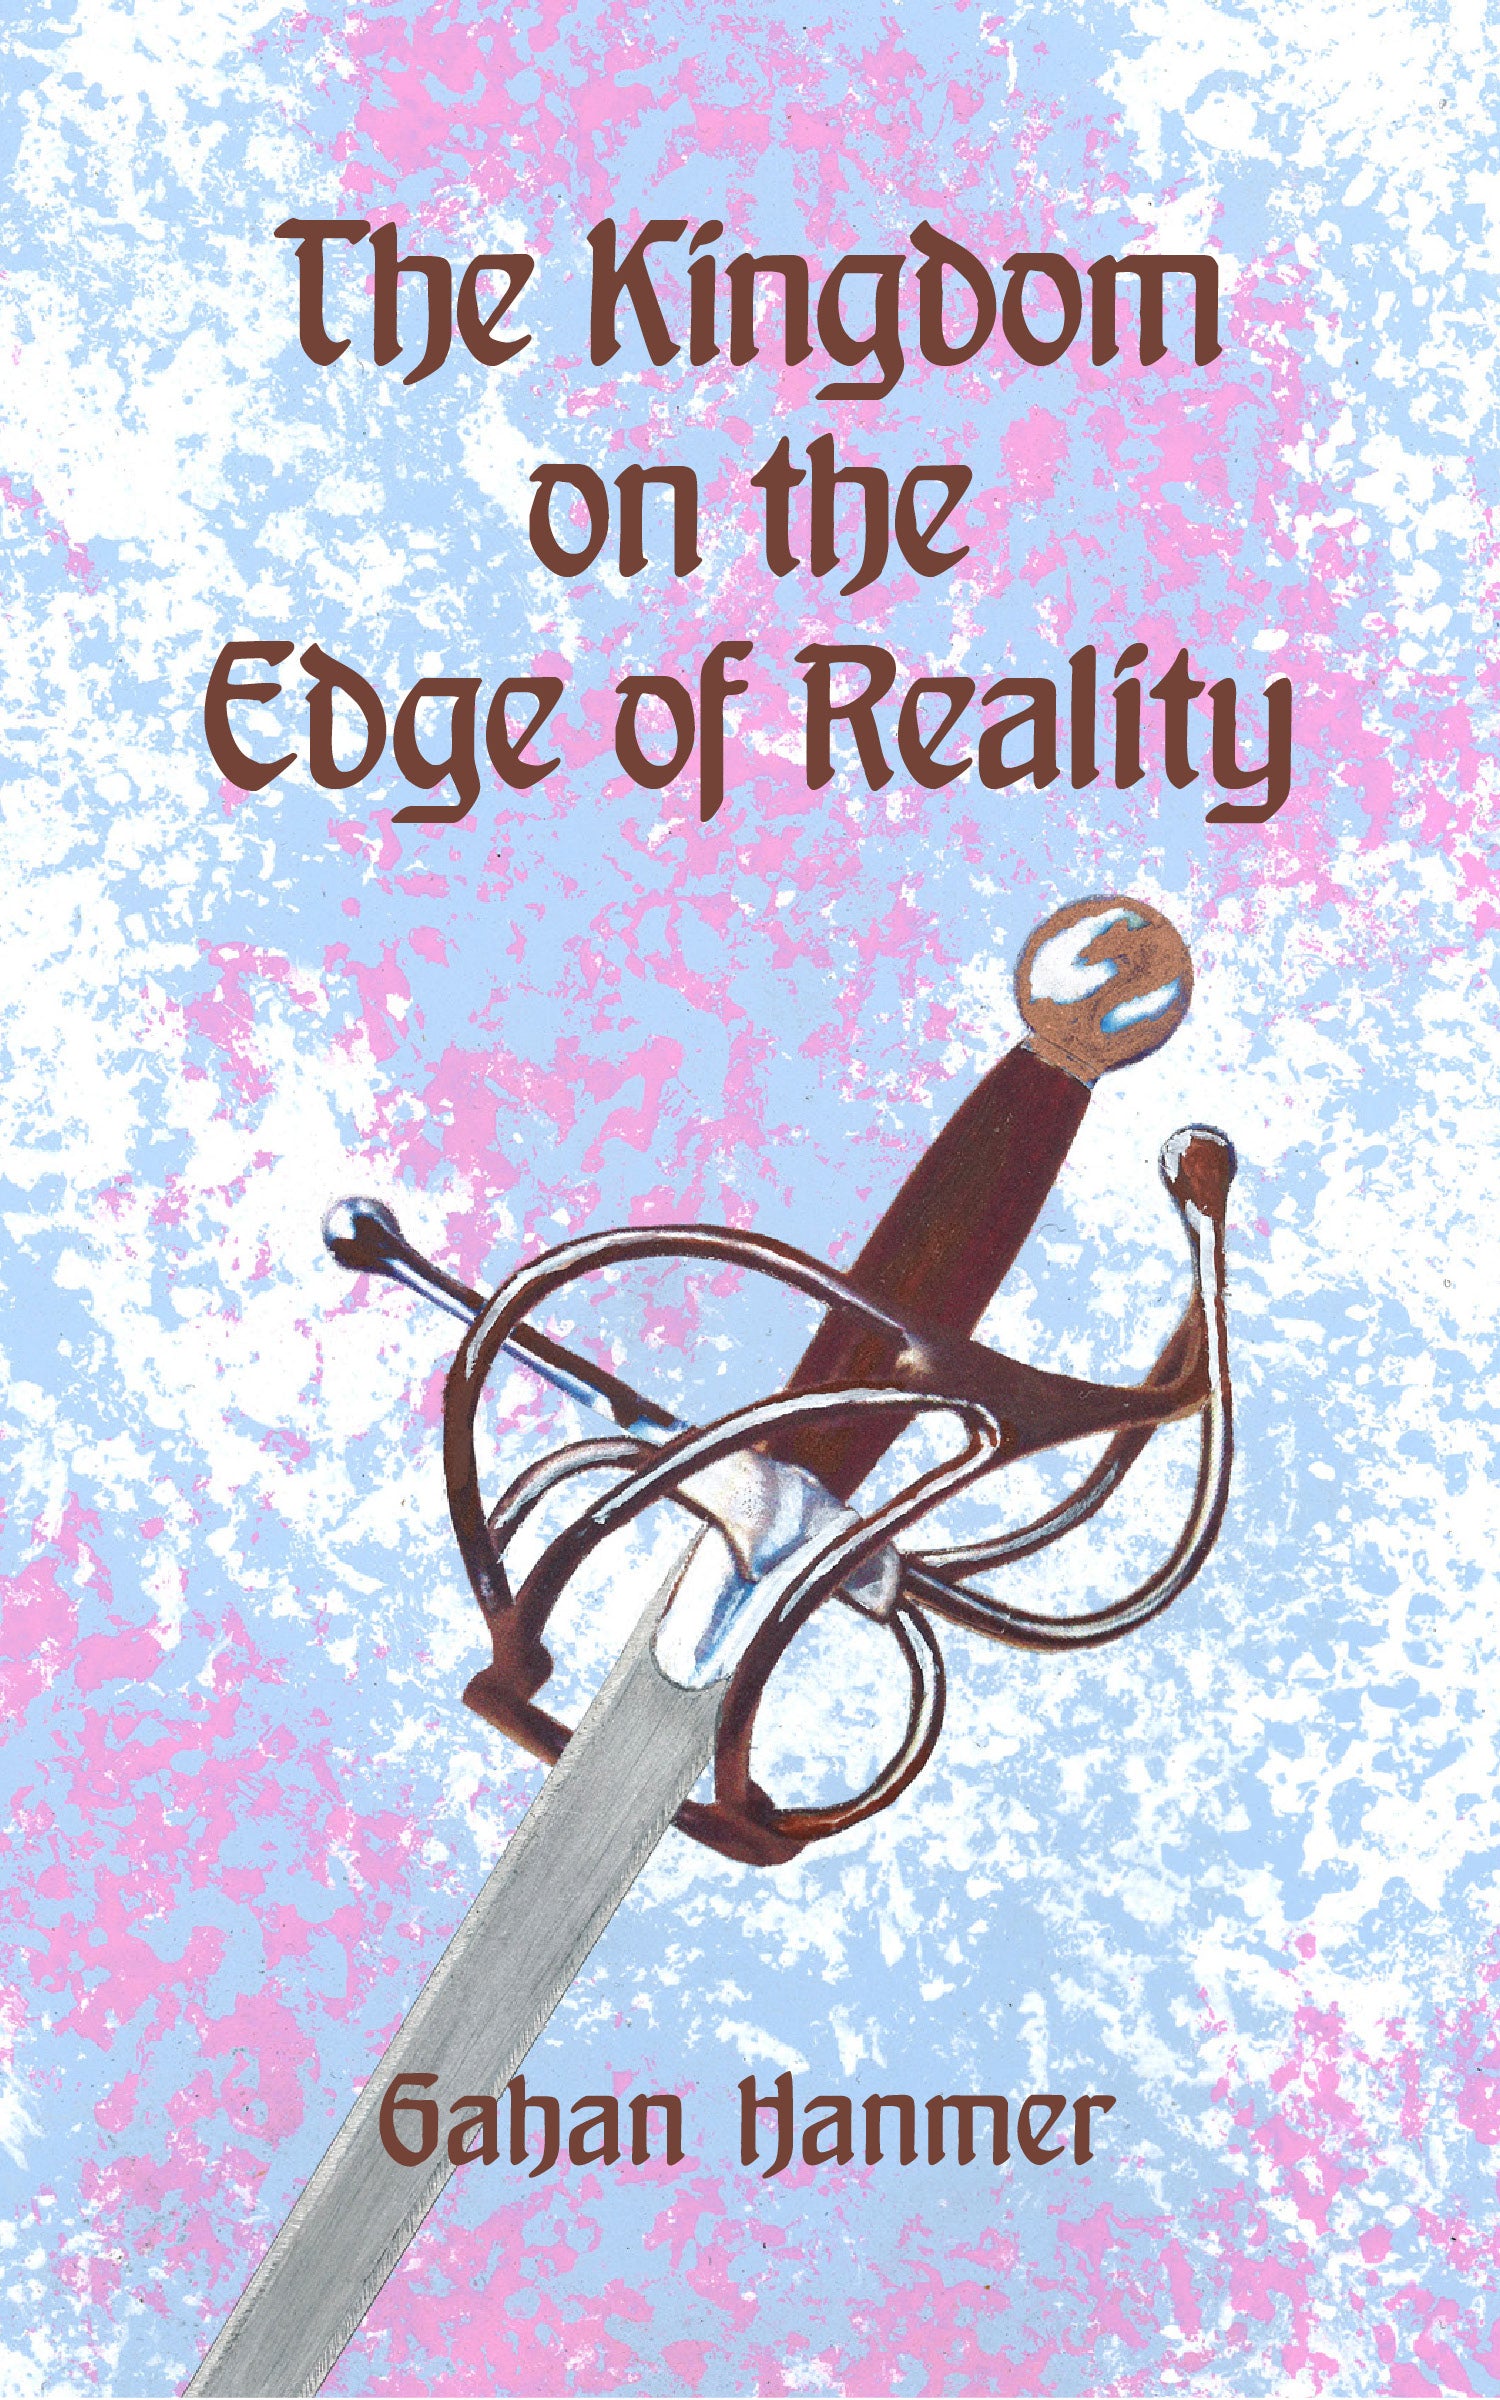 Book Review: The Kingdom on the Edge of Reality by Gahan Hanmer